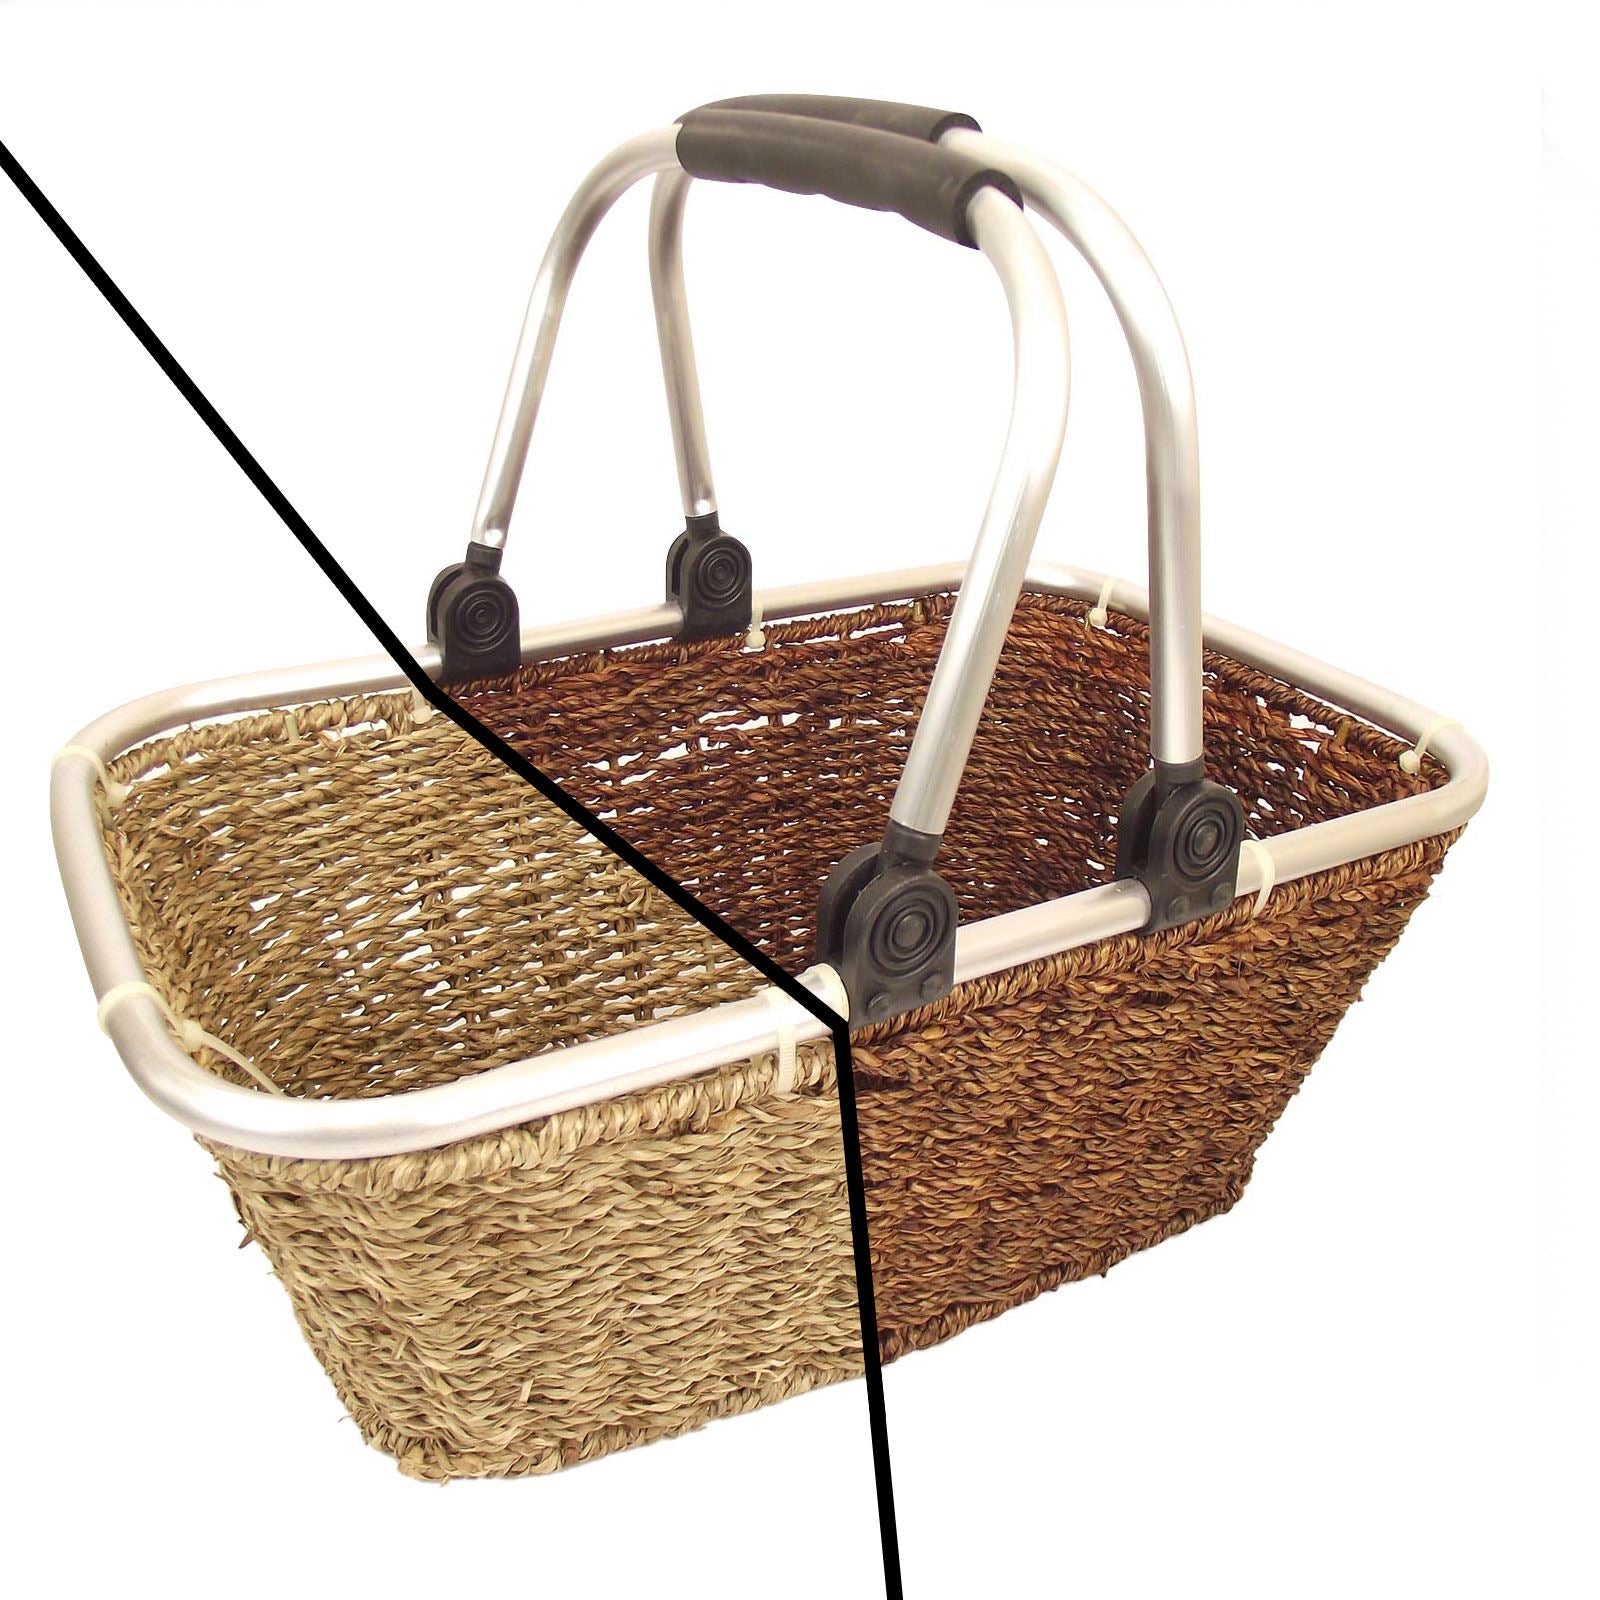 Extra Large Seagrass Shopping Basket with Metal Frame